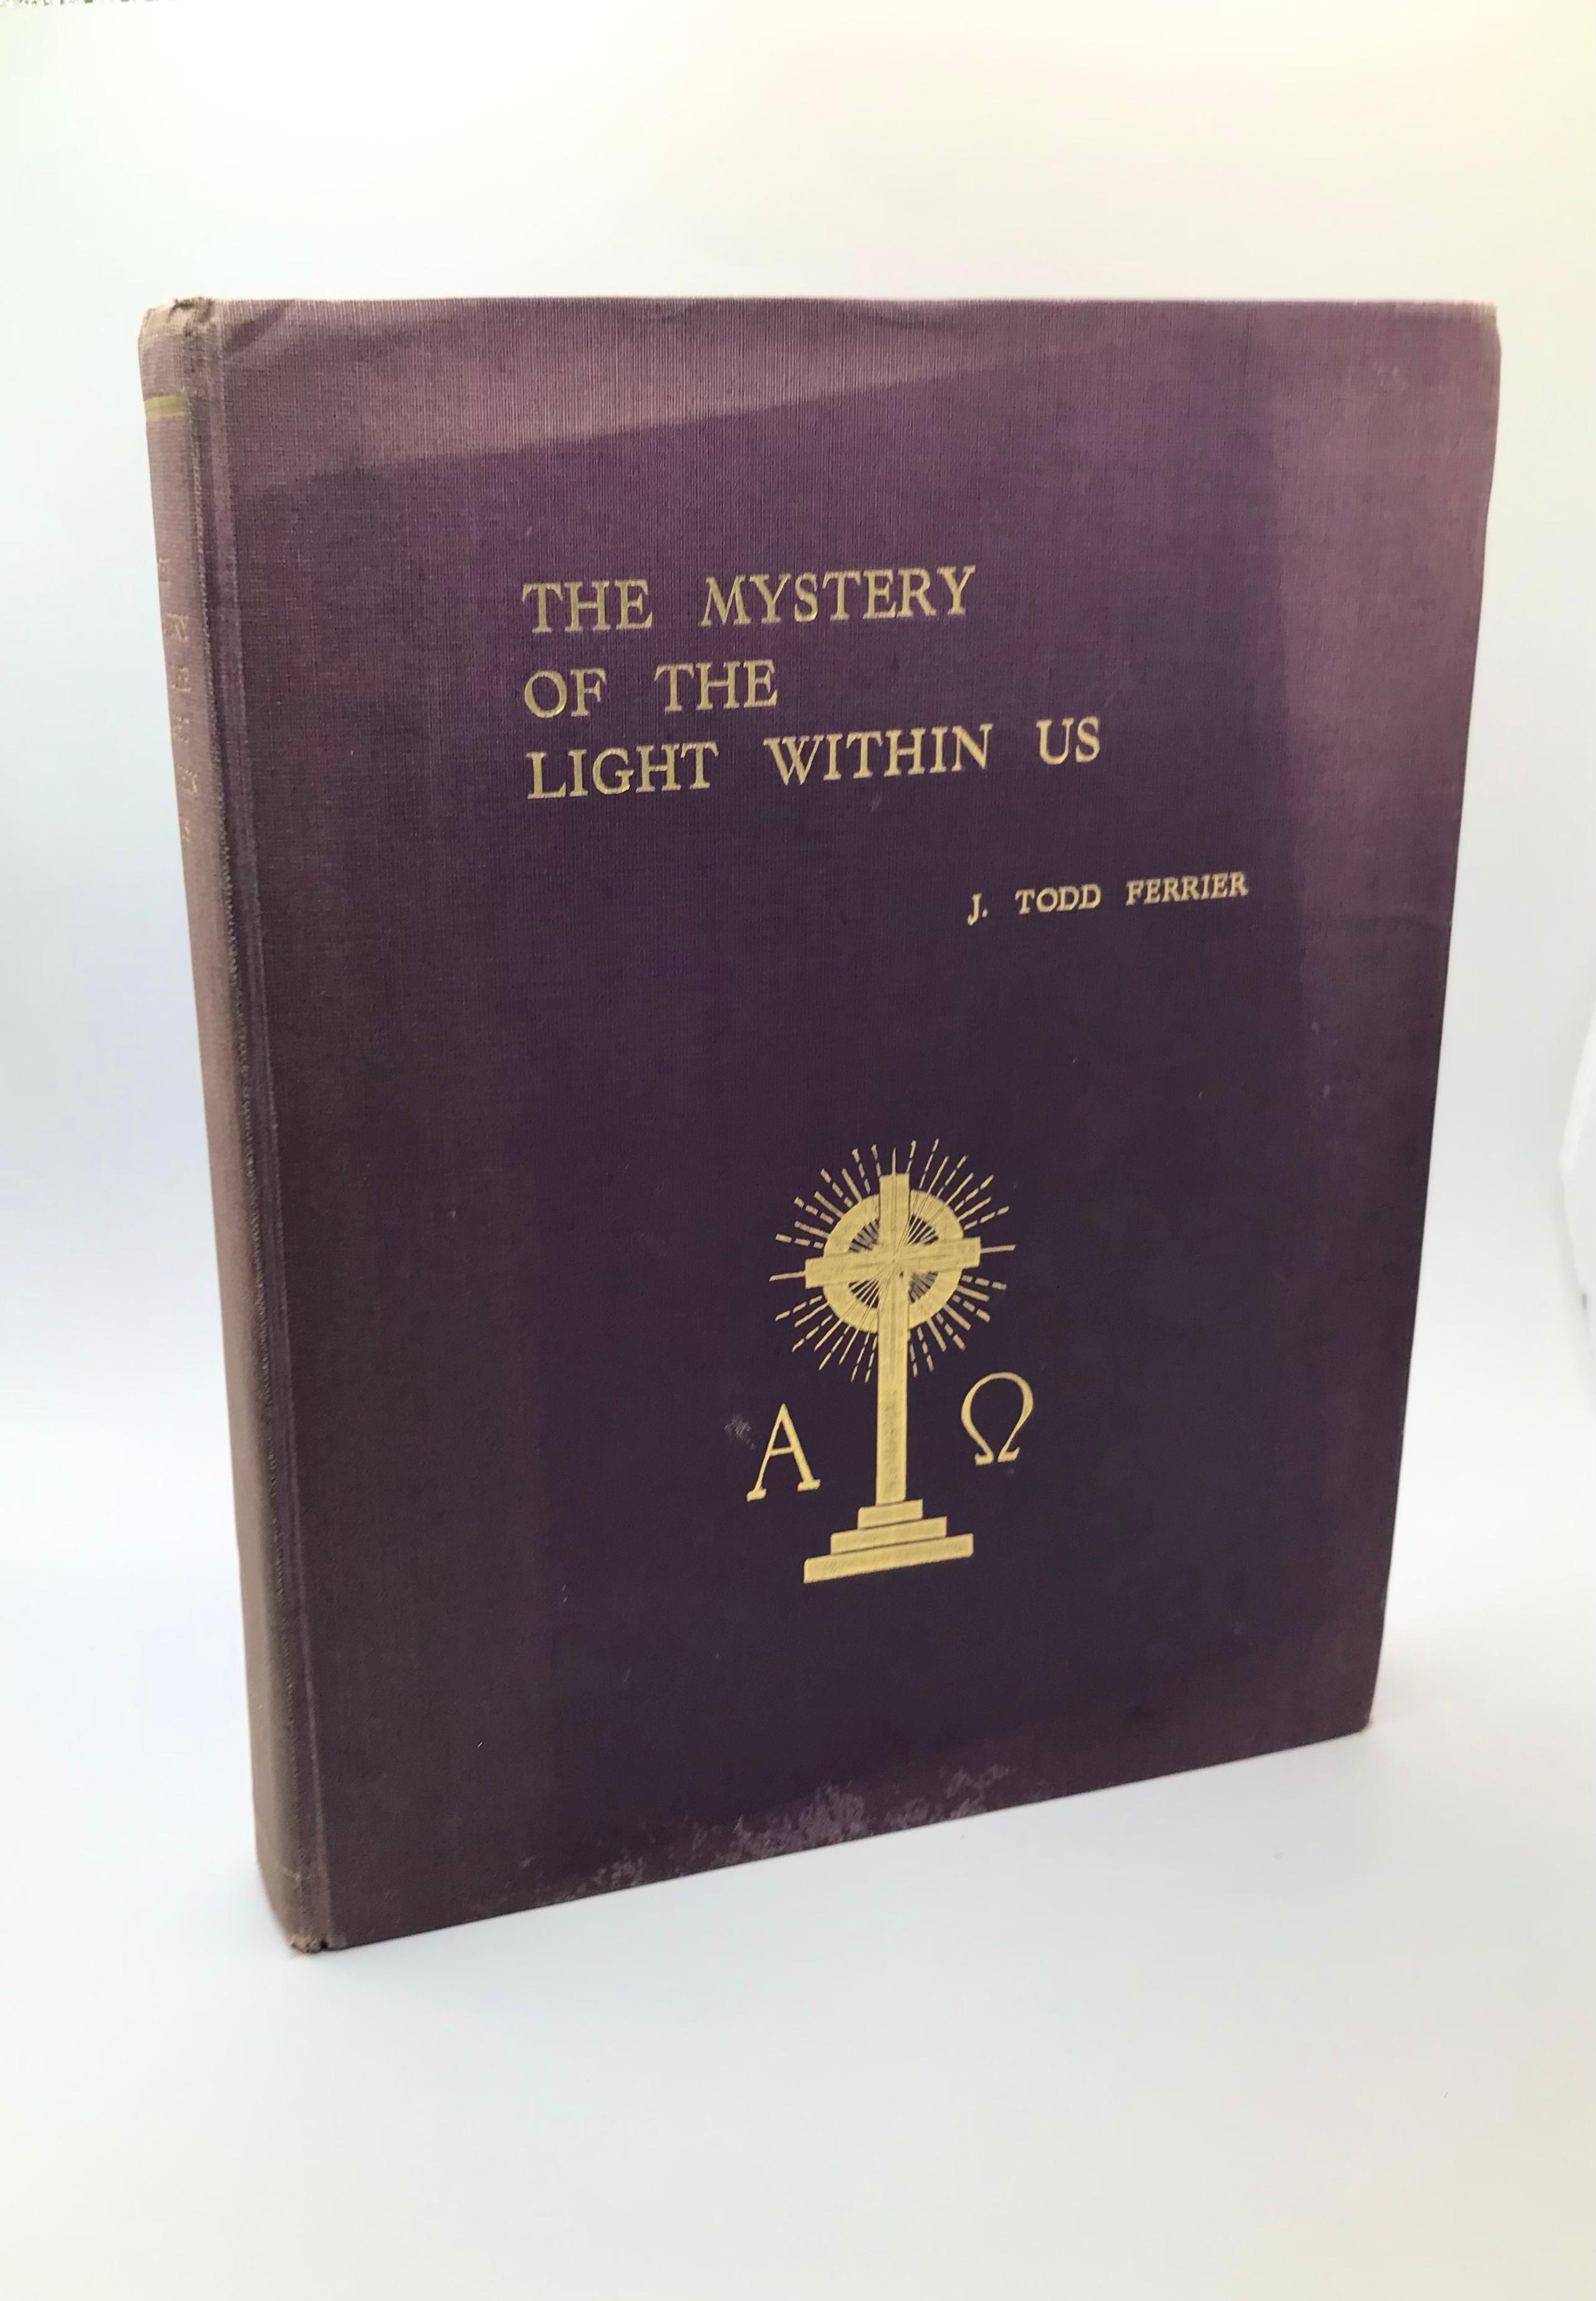 The Mystery of The Light Within Us by J. Todd & Amy Wright Ferrier